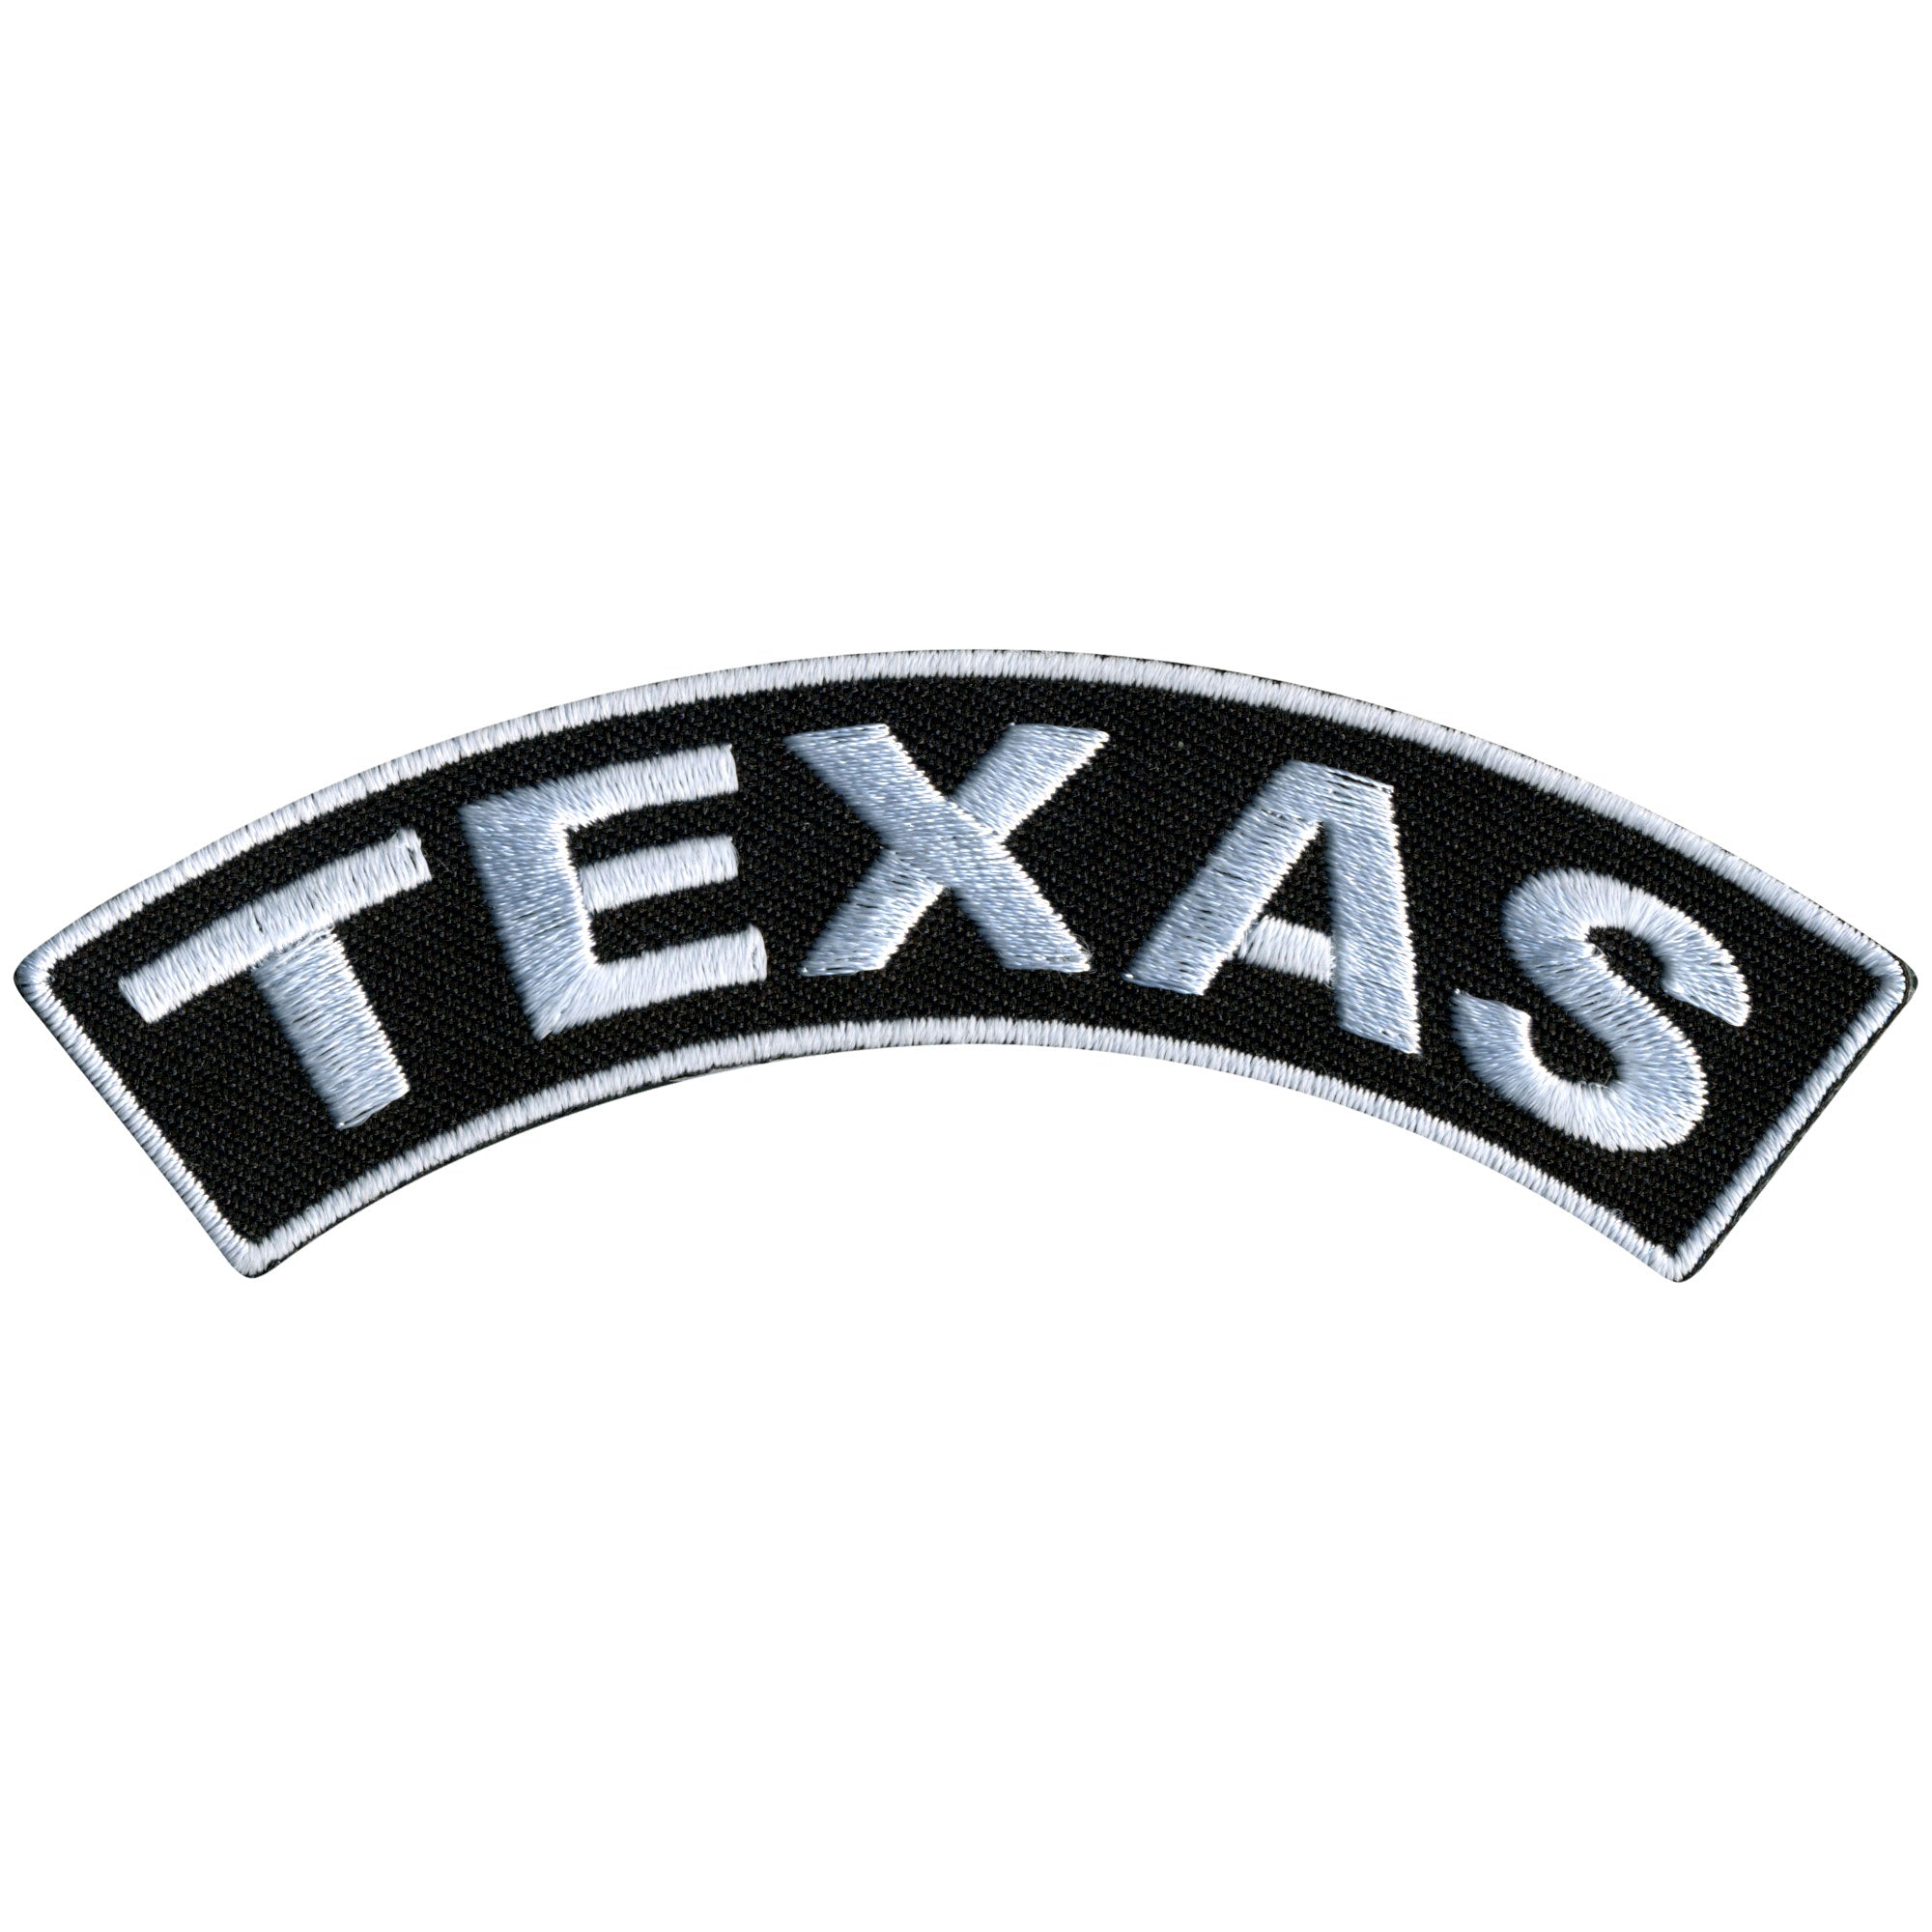 Hot Leathers Texas 4” X 1” Top Rocker Patch